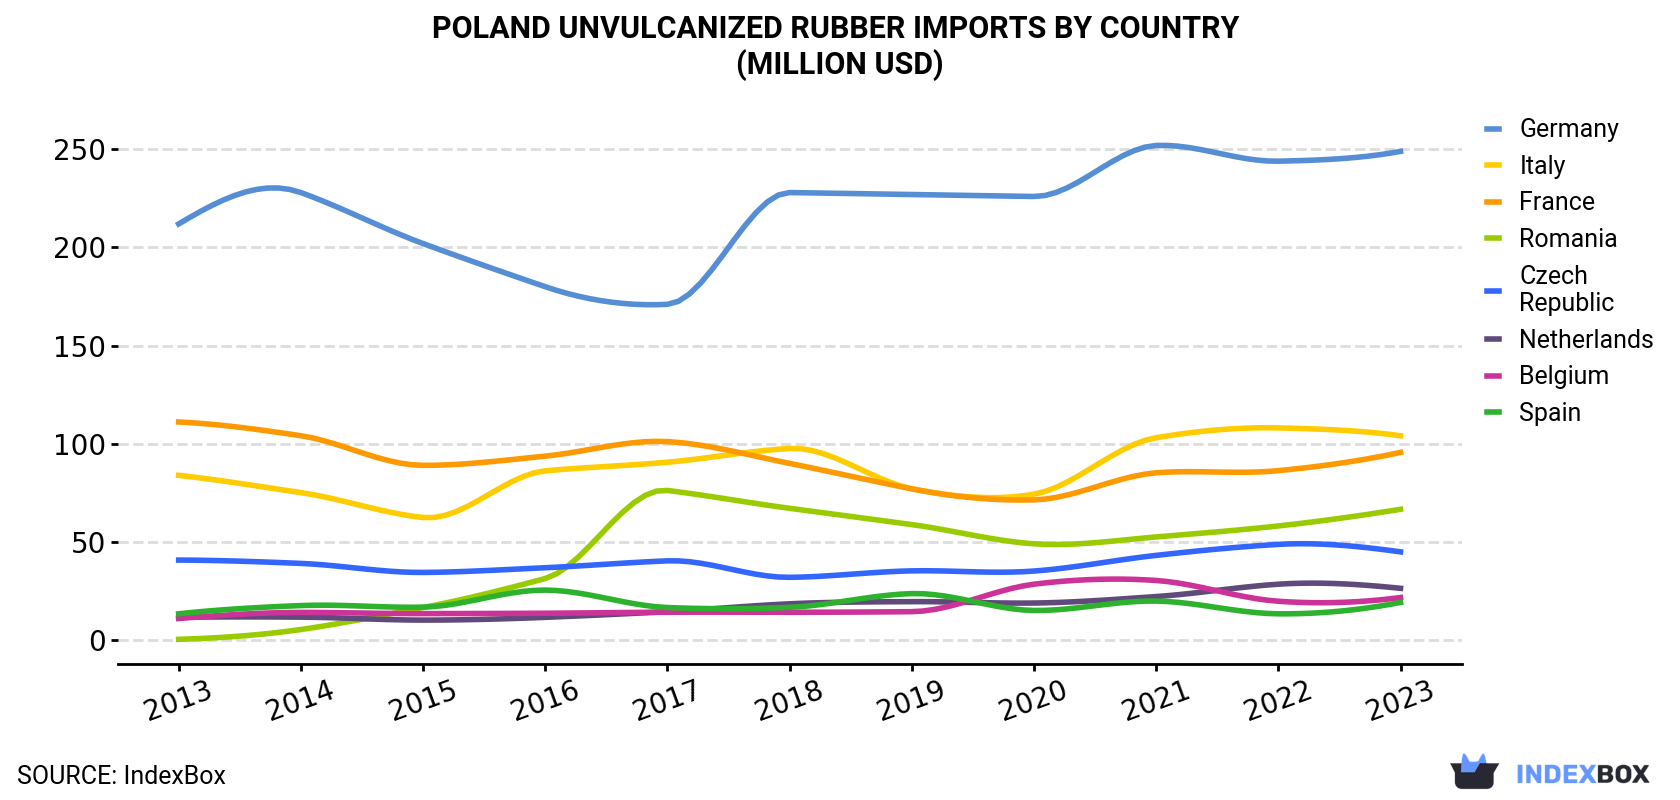 Poland Unvulcanized Rubber Imports By Country (Million USD)